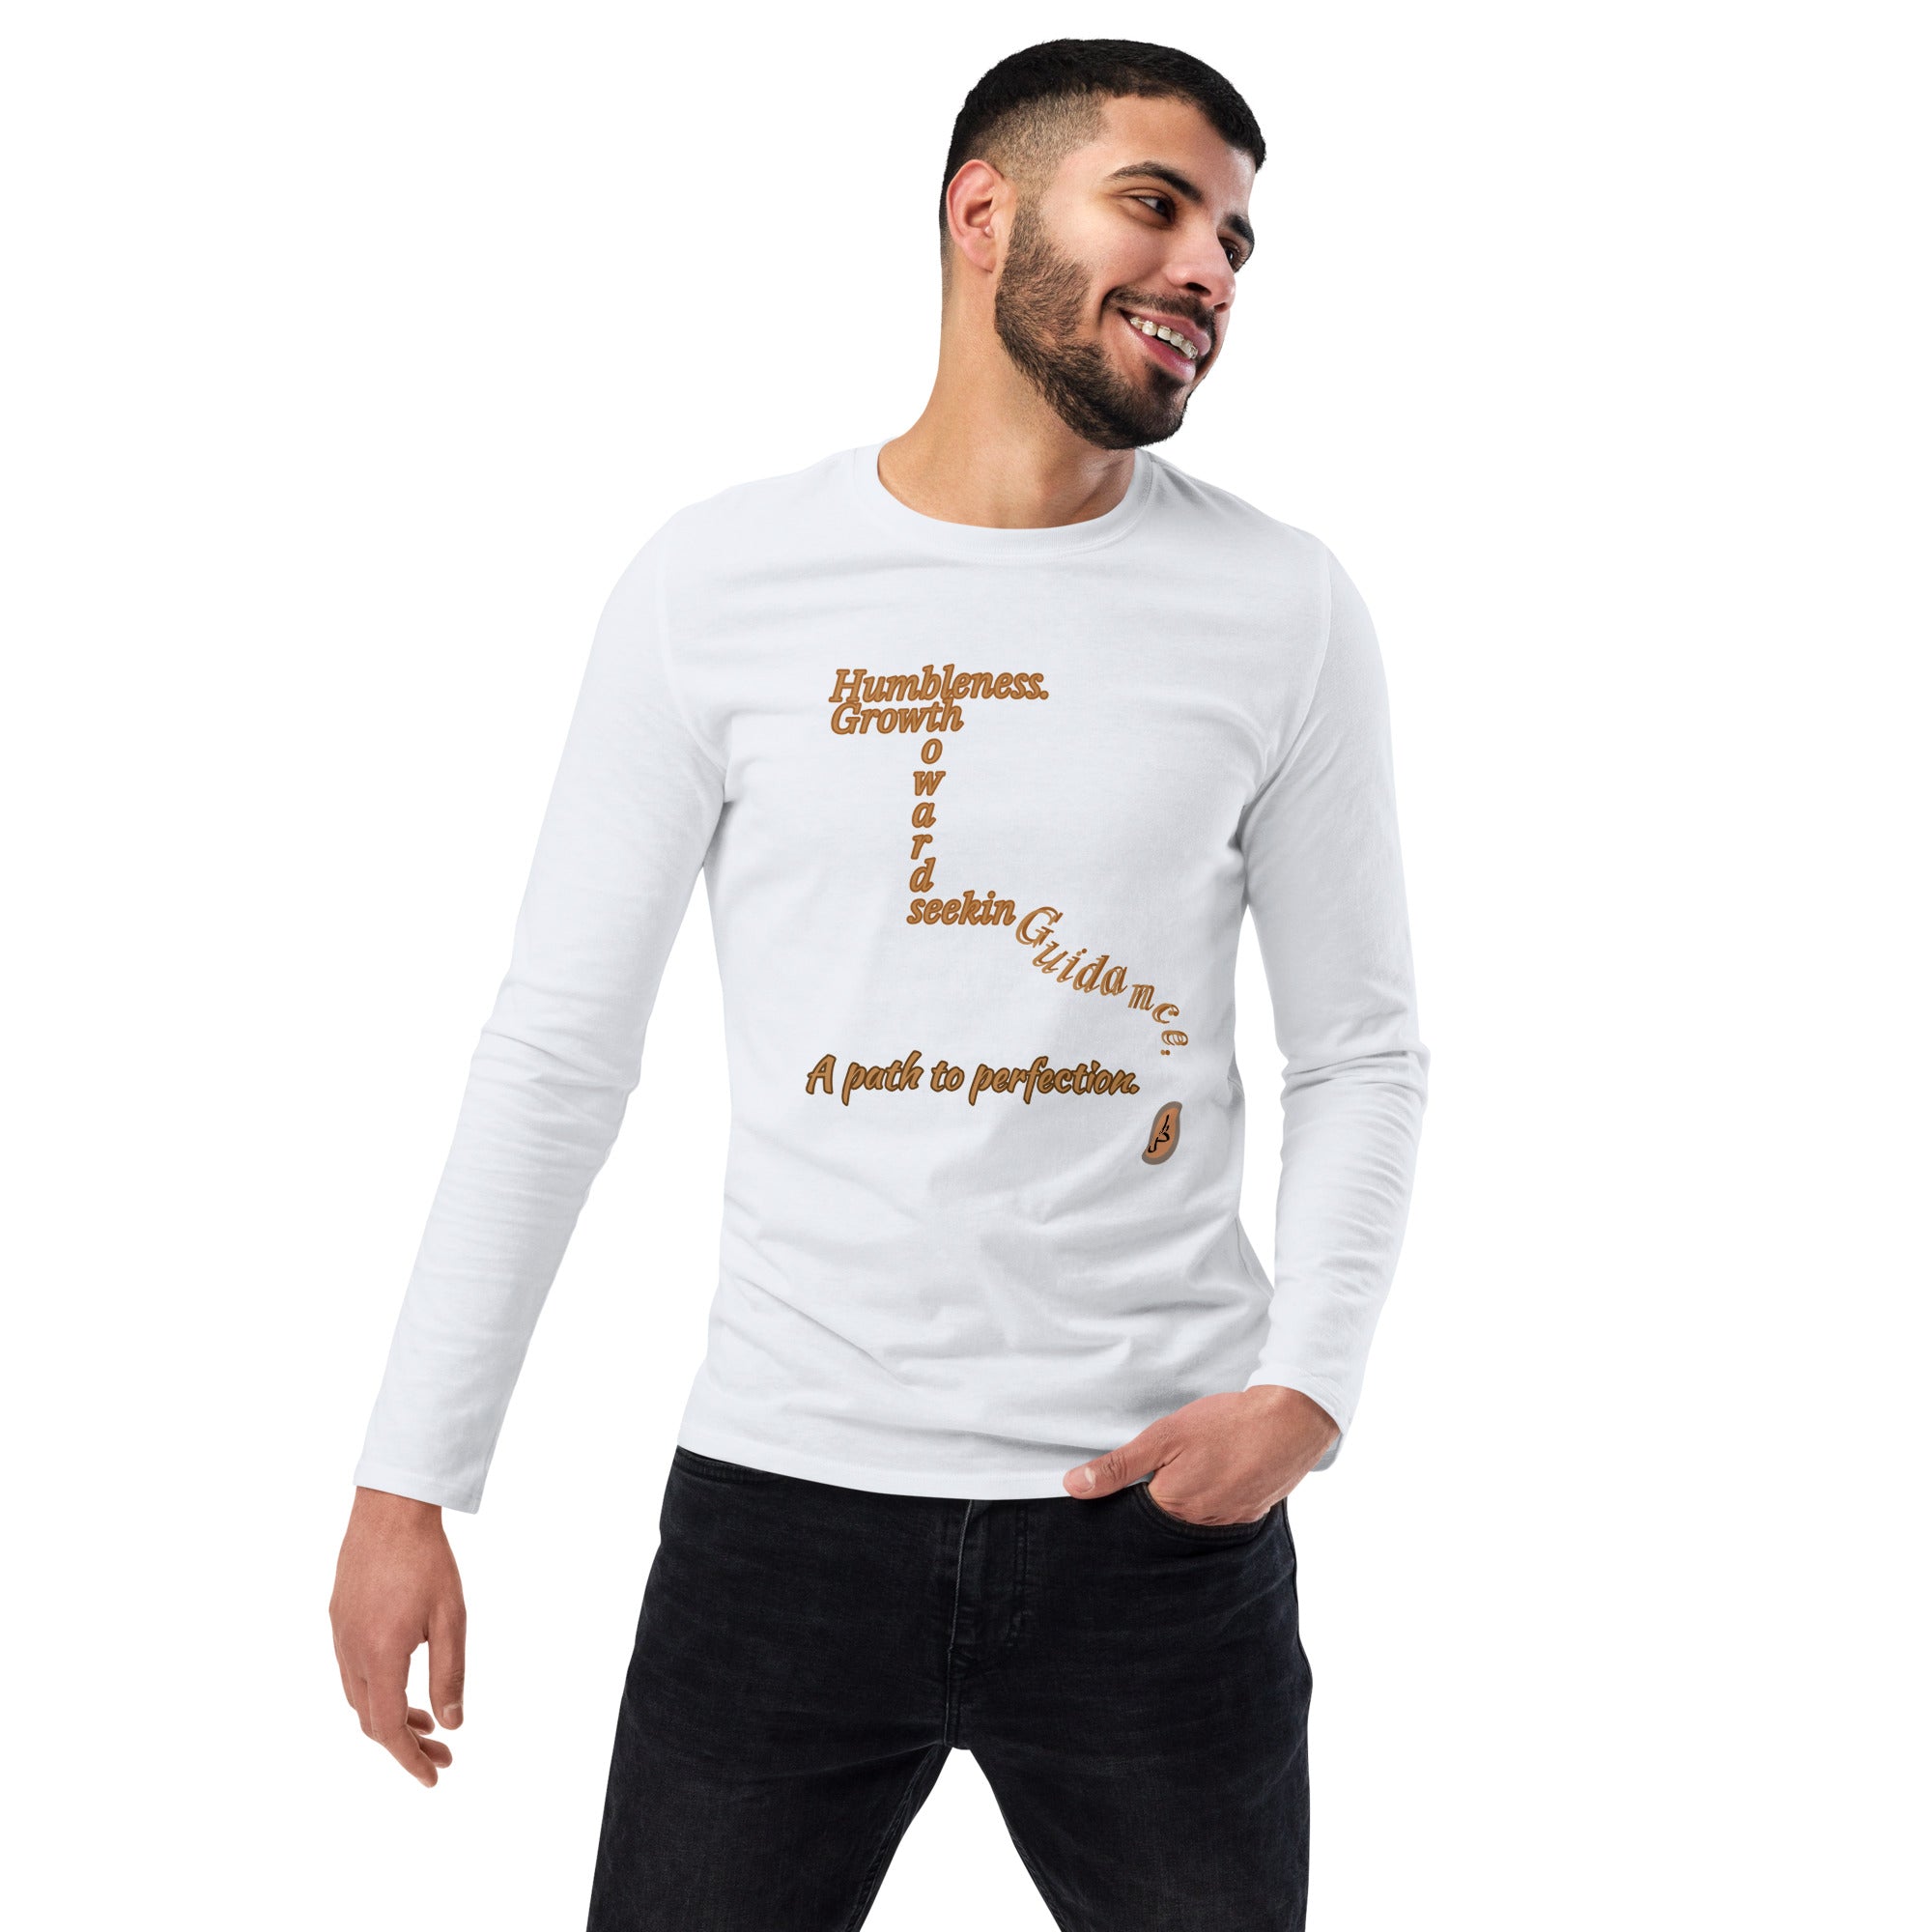 AJBeneficial Humble Love Conquered Unisex long sleeve shirt